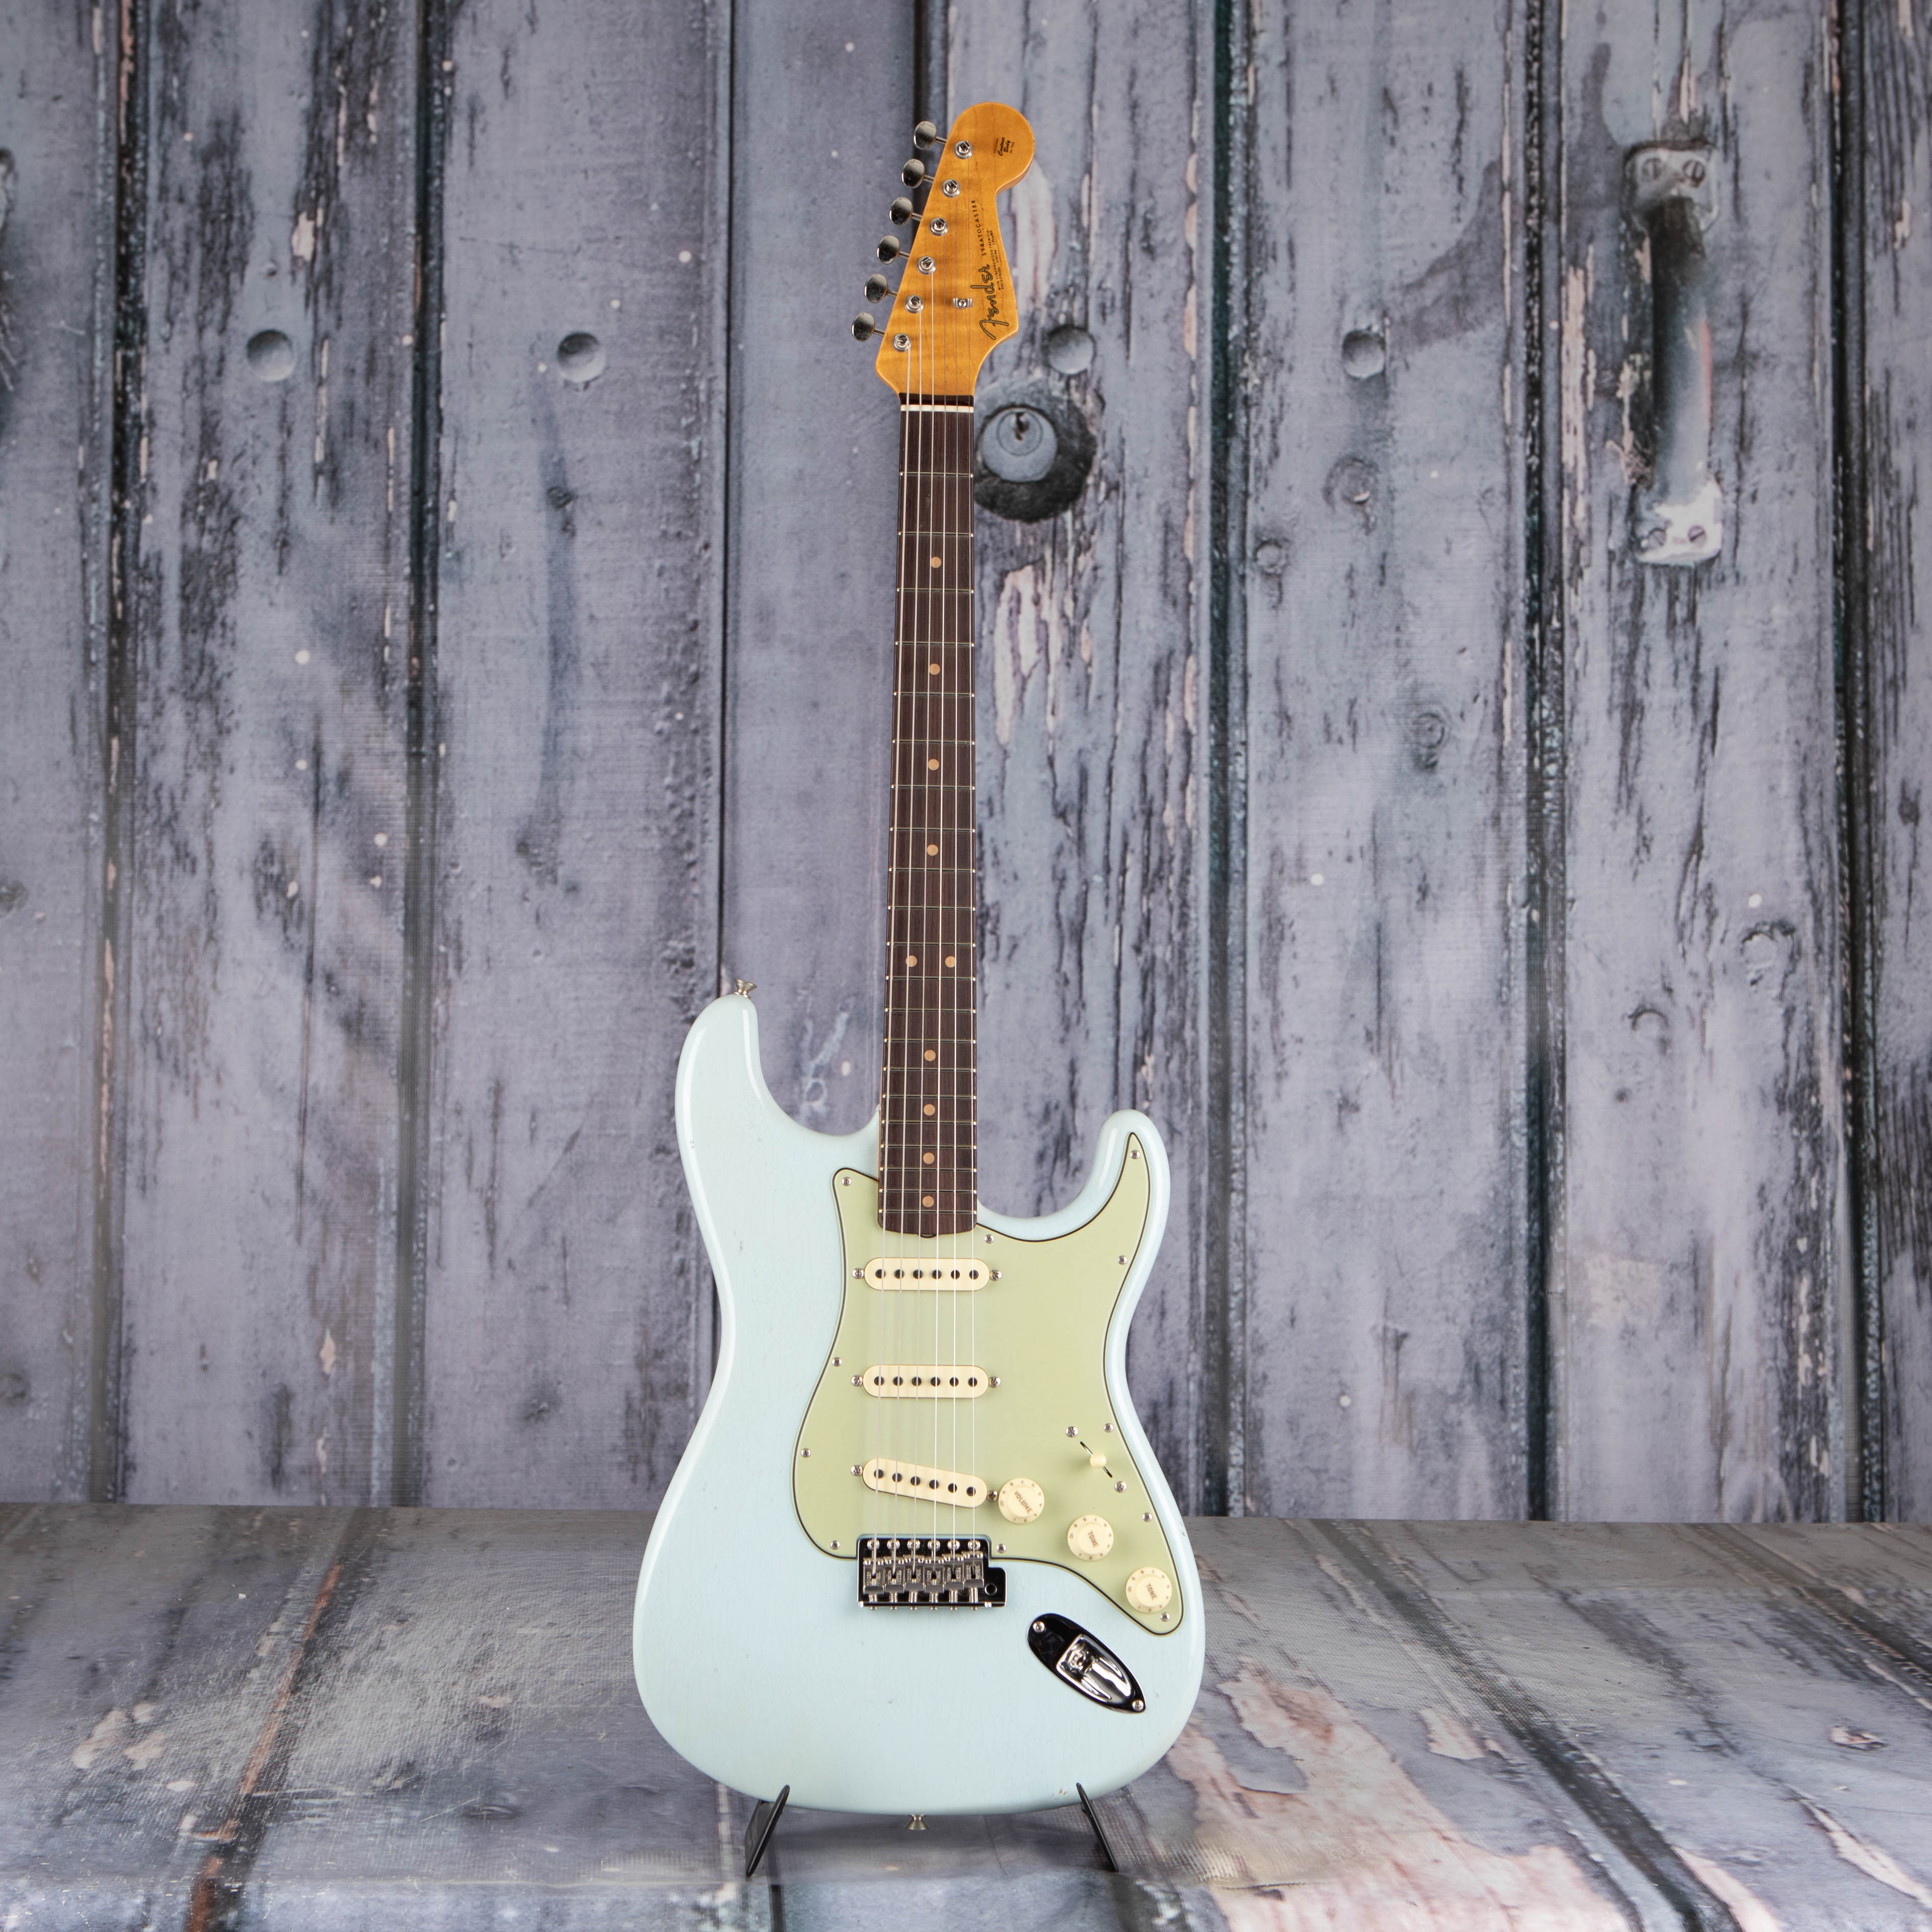 Fender Custom Shop Limited 1963 Stratocaster Journeyman Relic Closet Classic Electric Guitar, Aged Sonic Blue, front